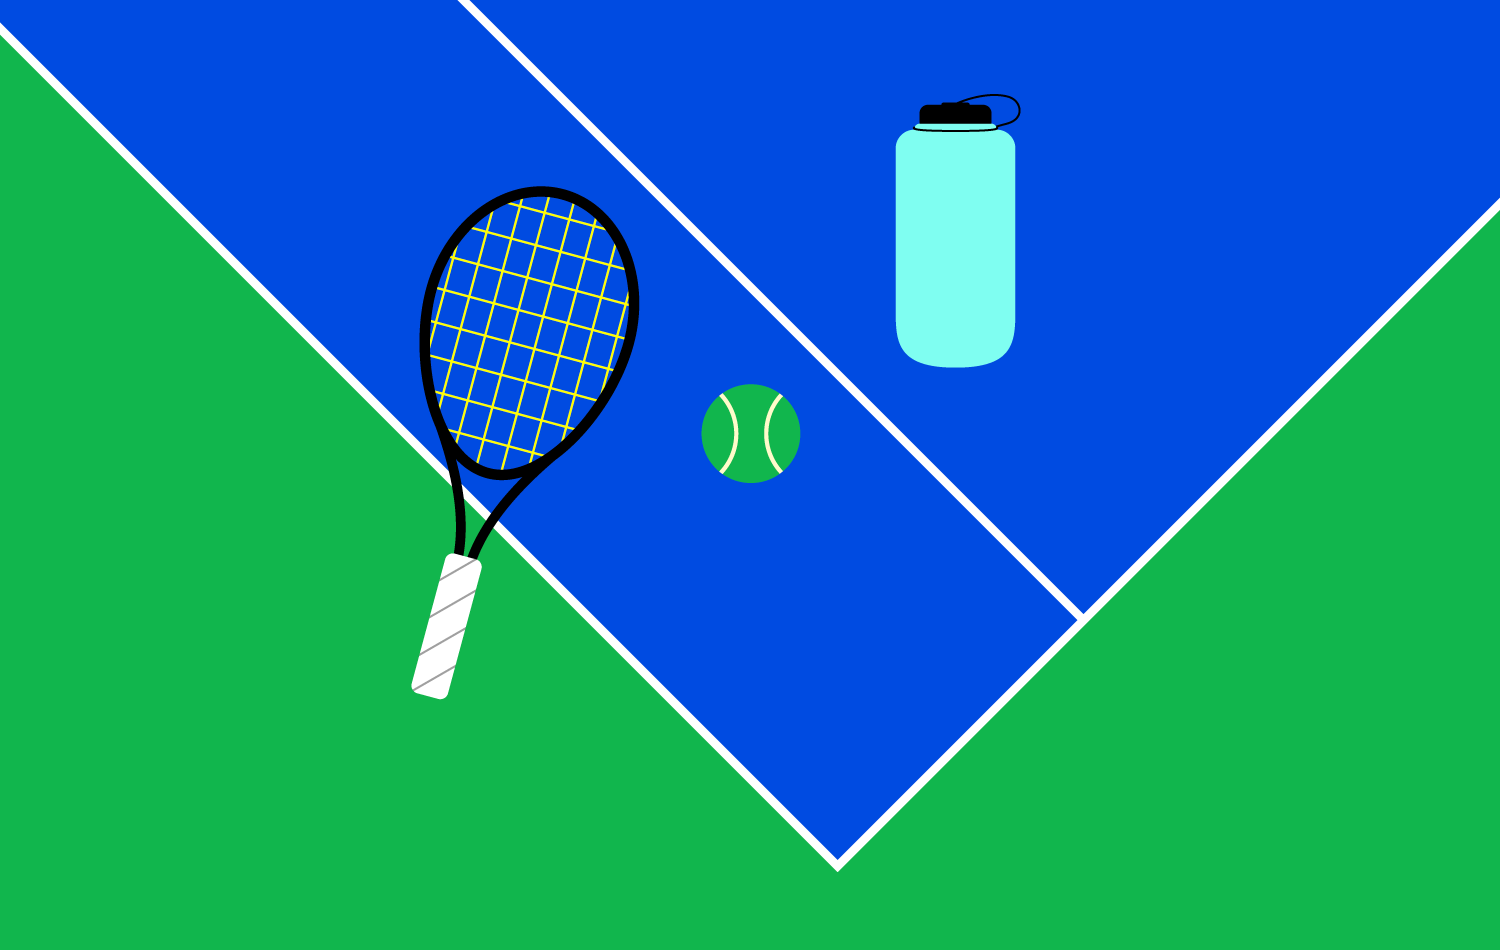 Tennis court with racket, tennis ball and water bottle